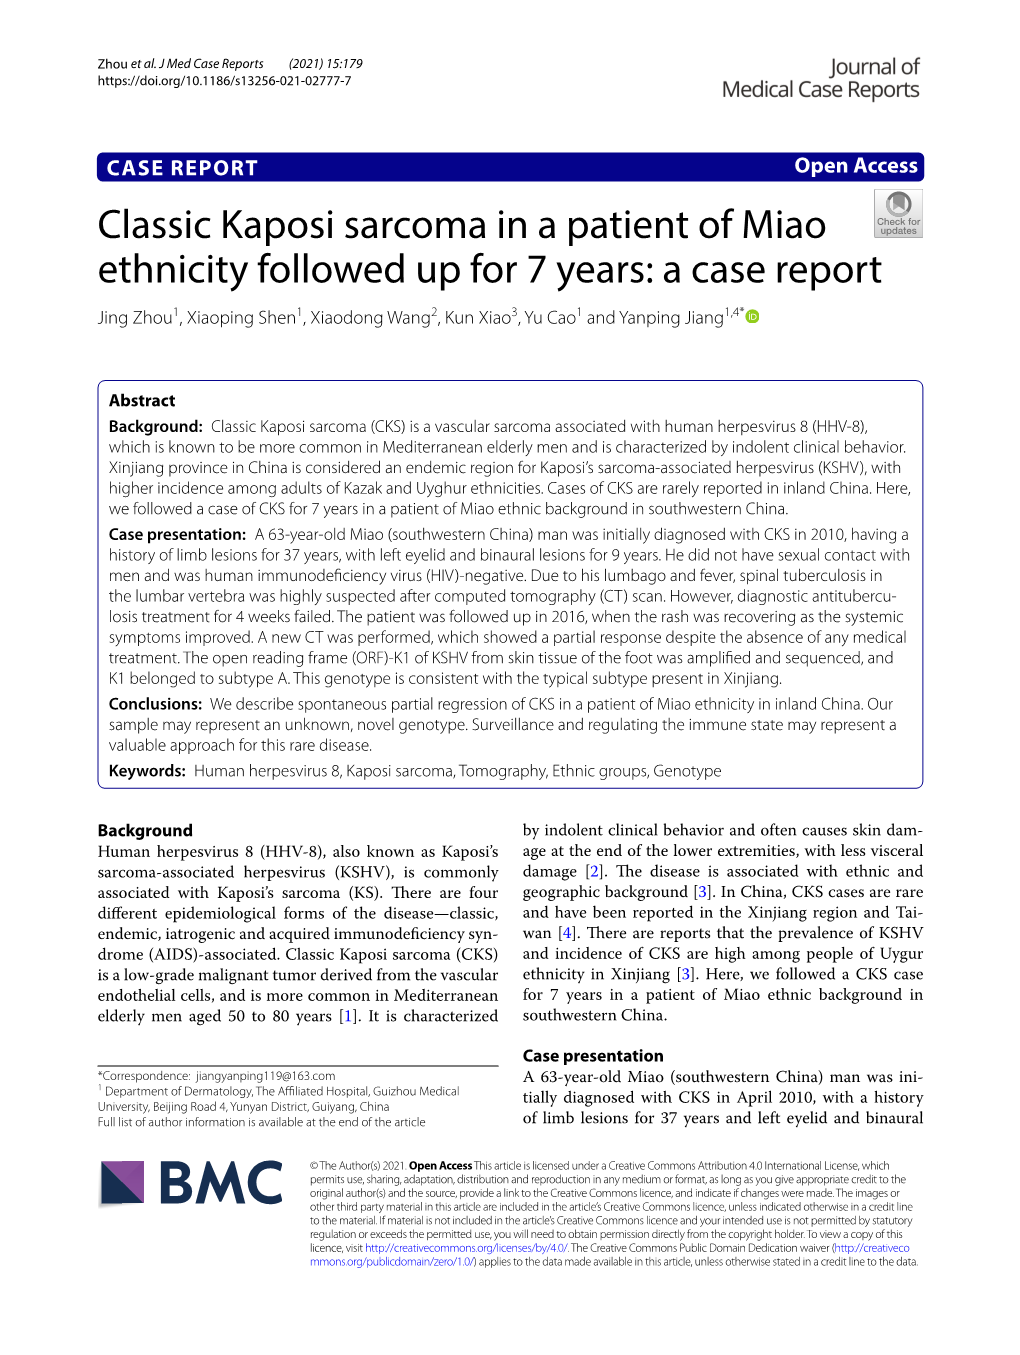 A Case of Classic Kaposi Sarcoma in a Patient of Miao Ethnicity Followed Up